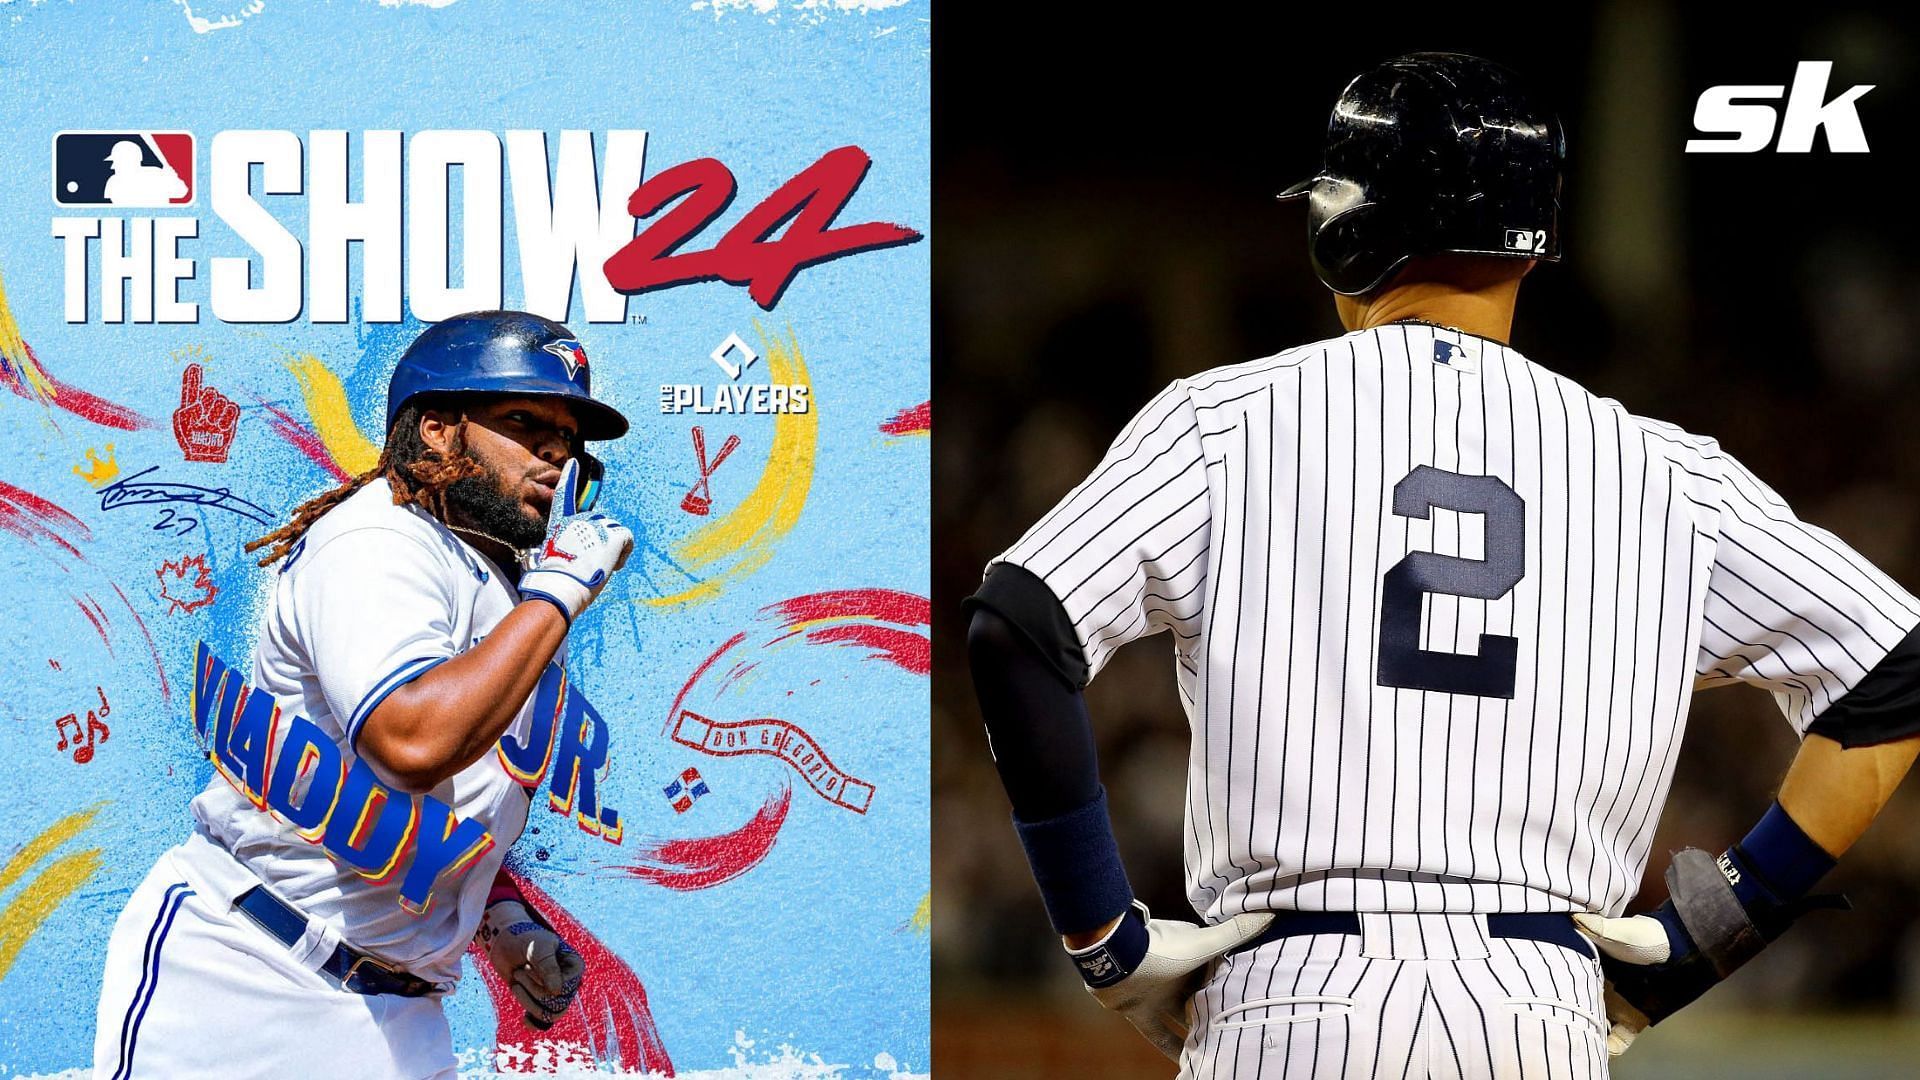 MLB The Show 24 will feature Storylines mode based on career of Derek Jeter